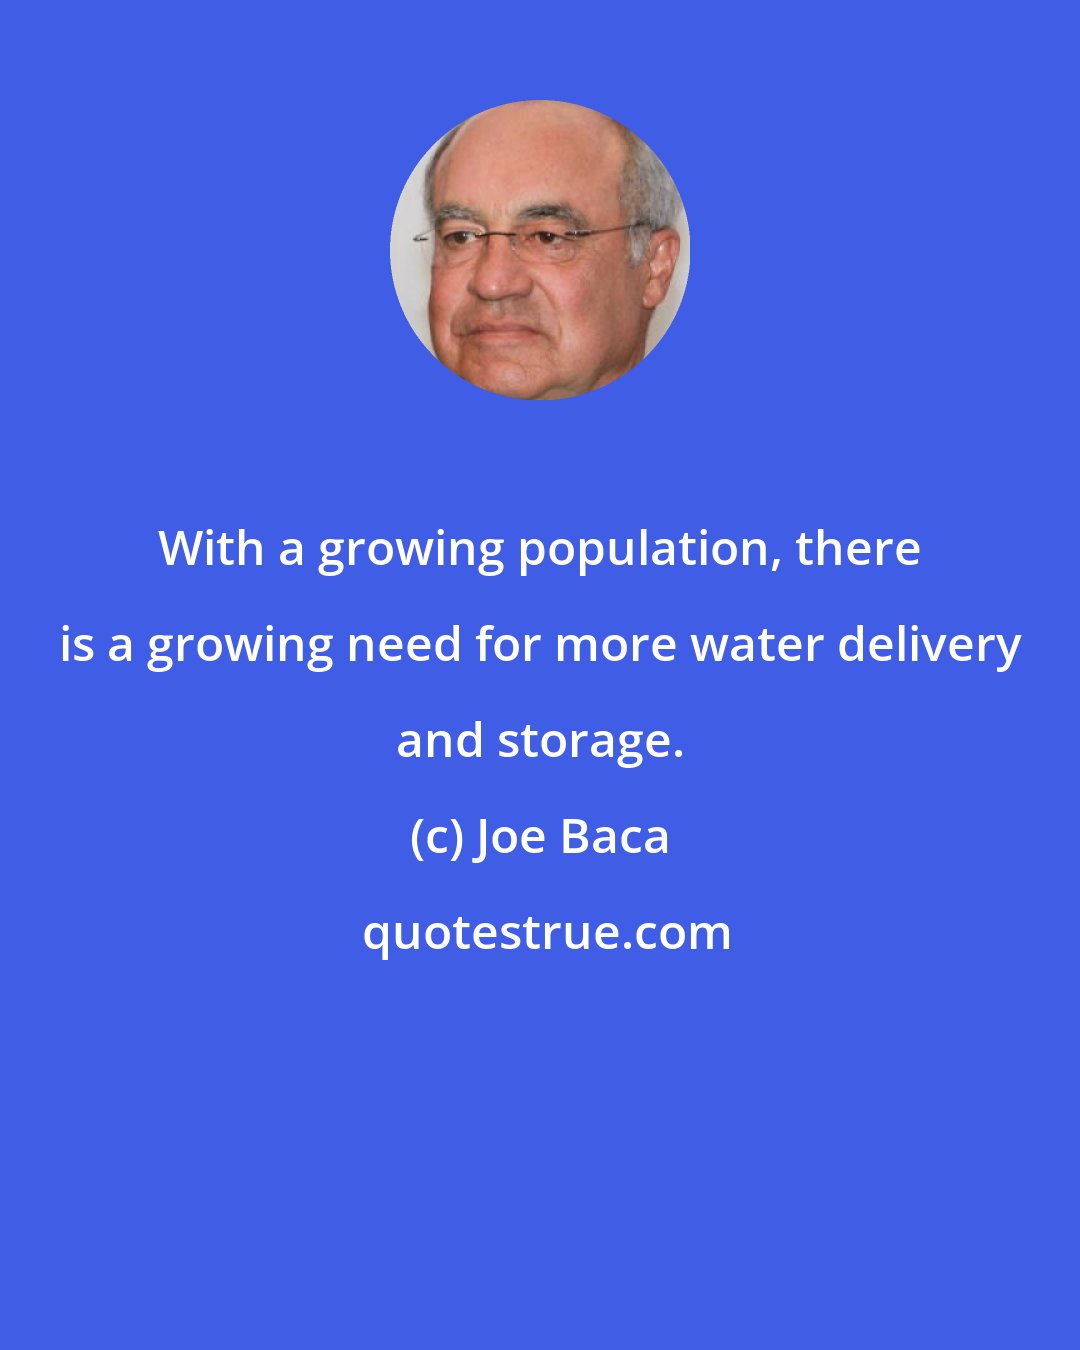 Joe Baca: With a growing population, there is a growing need for more water delivery and storage.